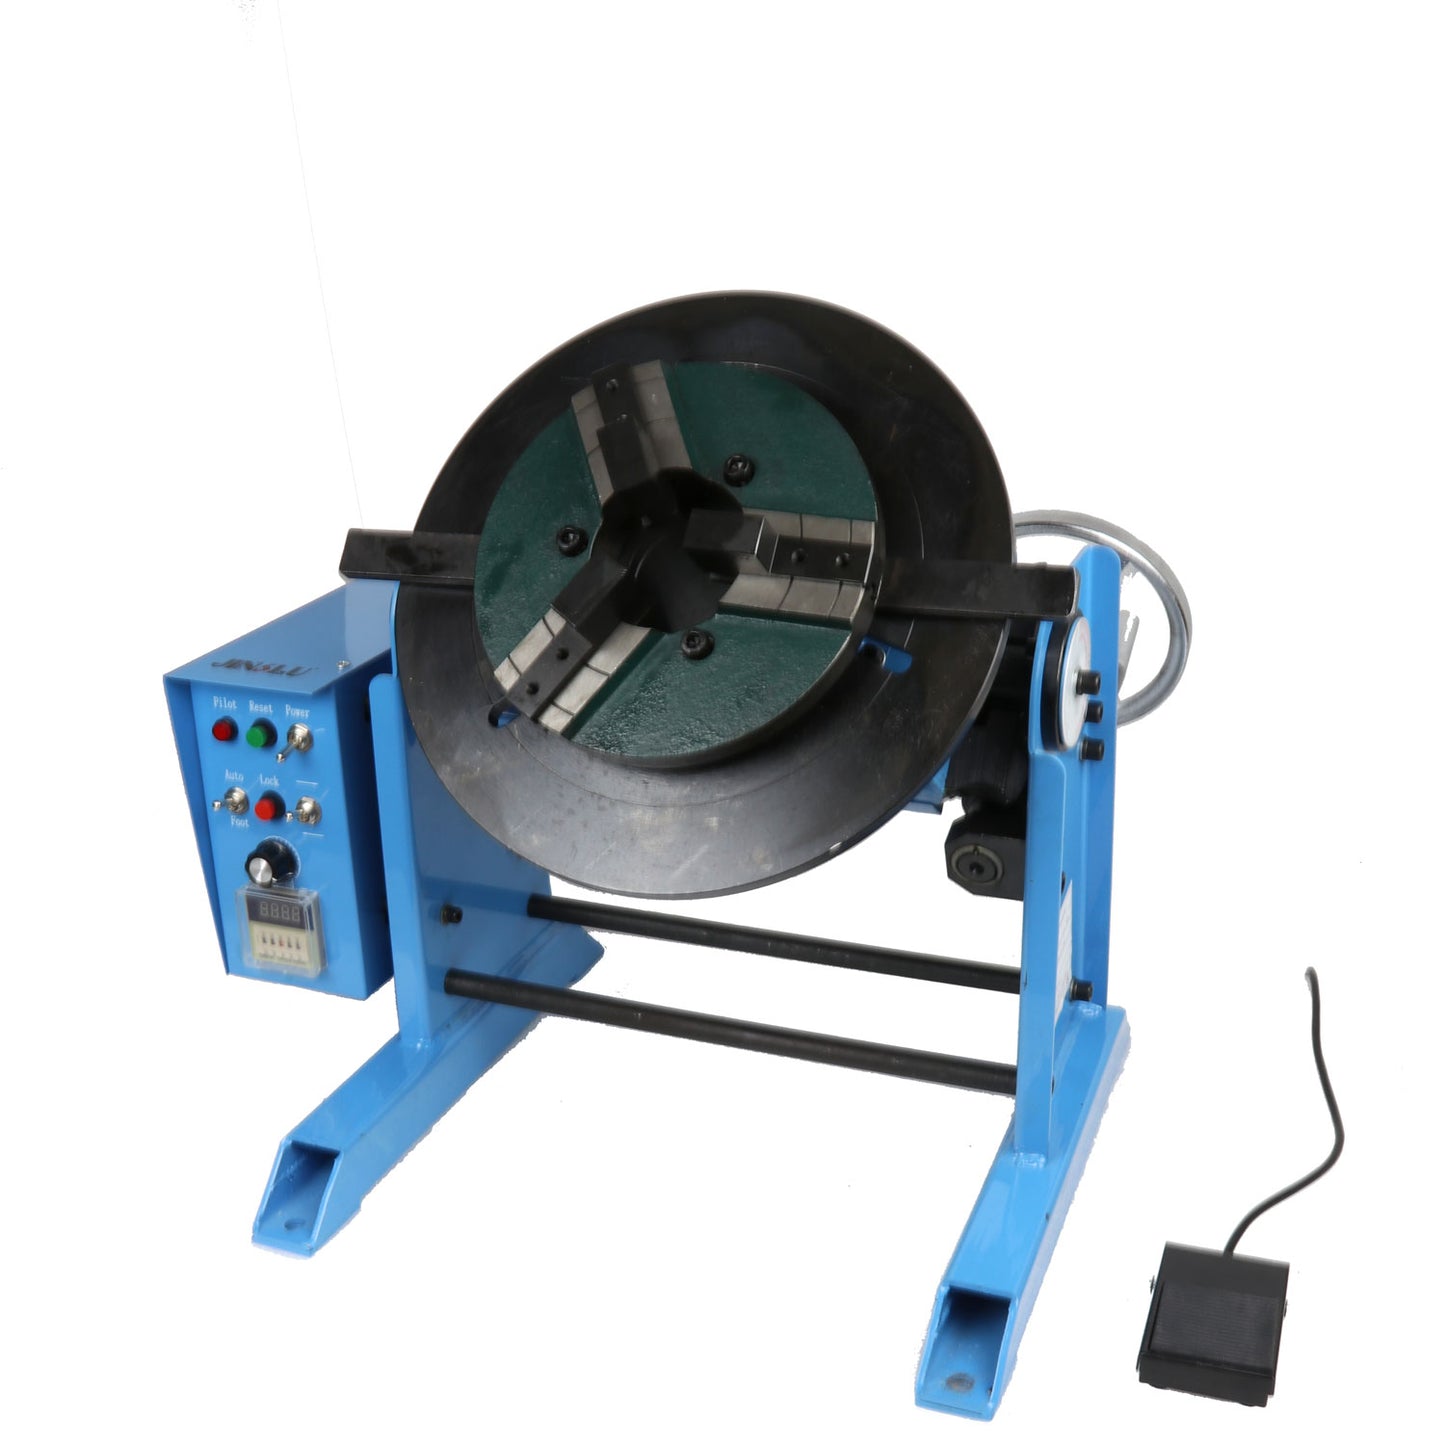 HD30 30KG Load Welding Turntable Positioner for Pipe Welding with 200mm Manual Chuck. (Customized products, please contact us to buy, EMAIL: sales@jinslu.com)